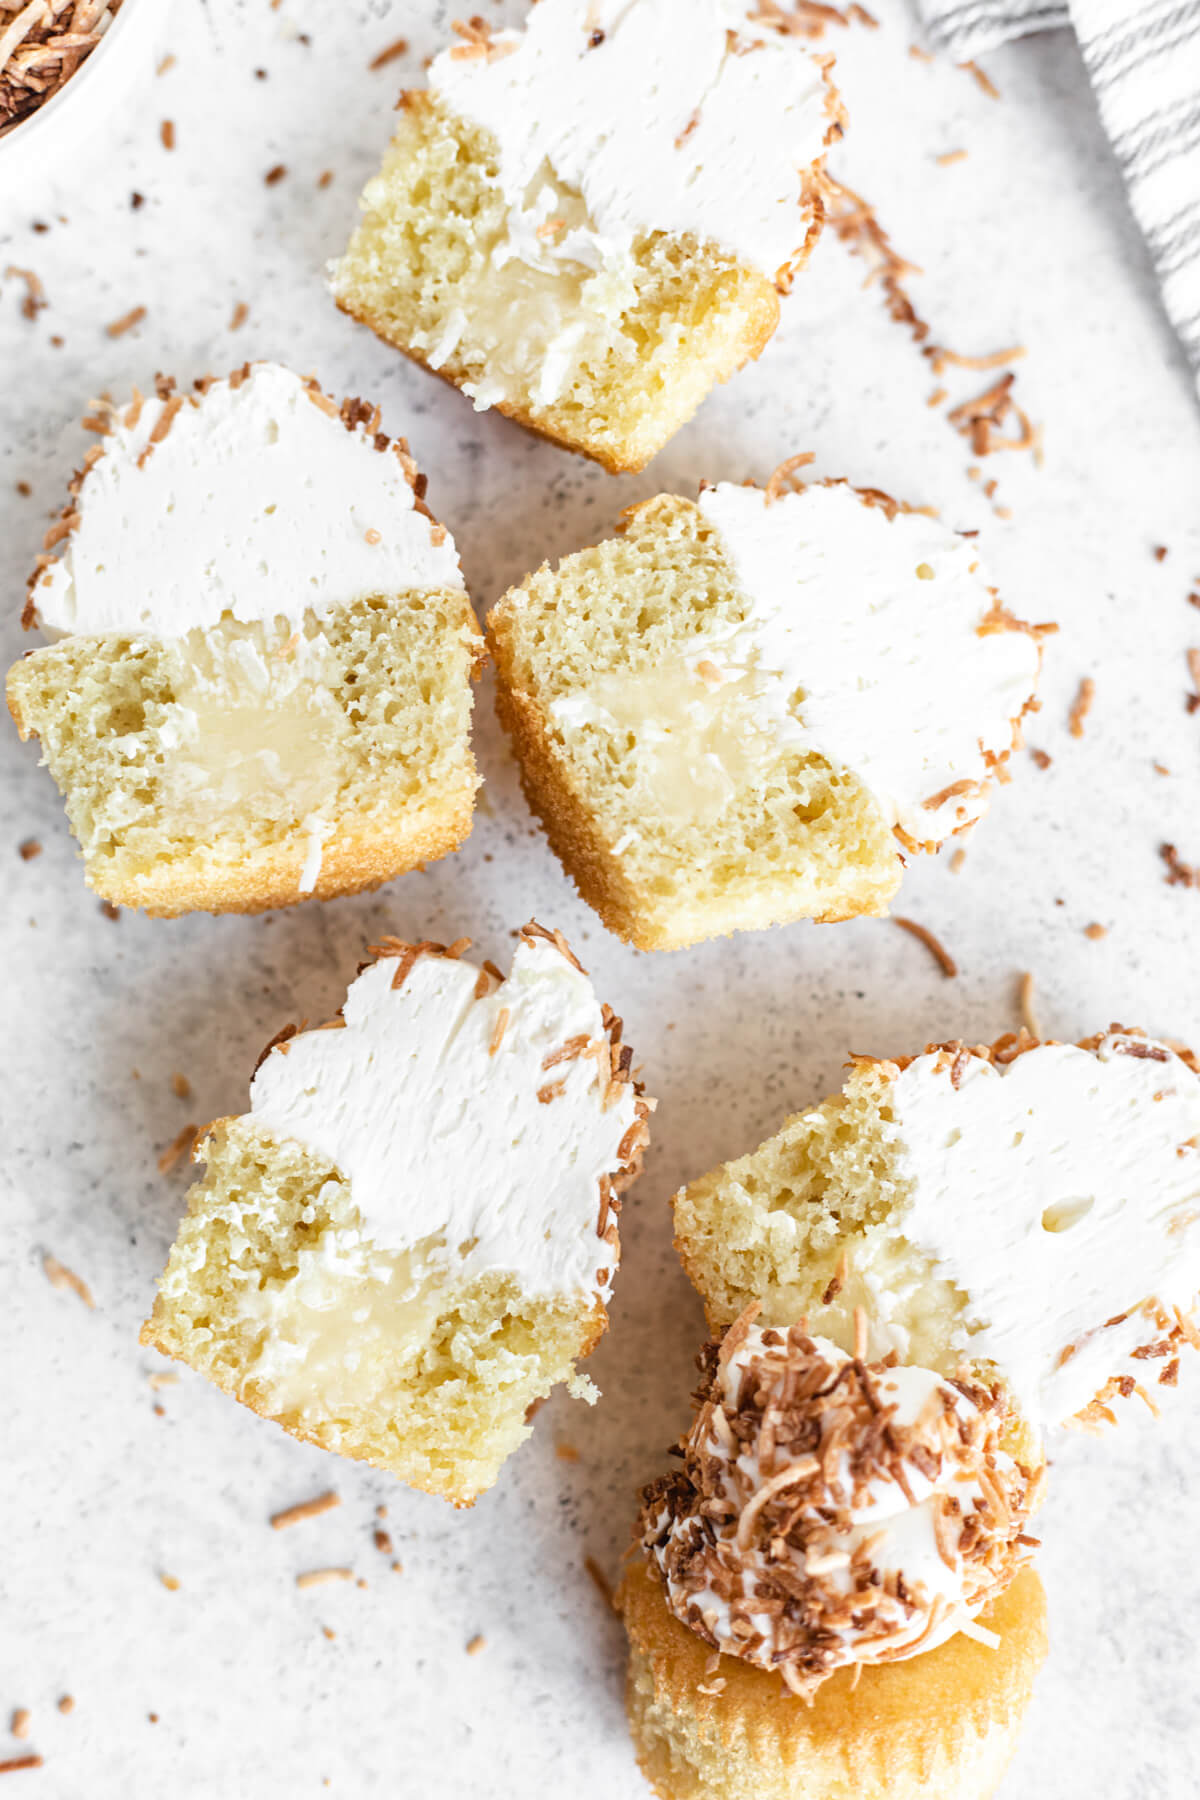 halved cupcakes with coconut filling